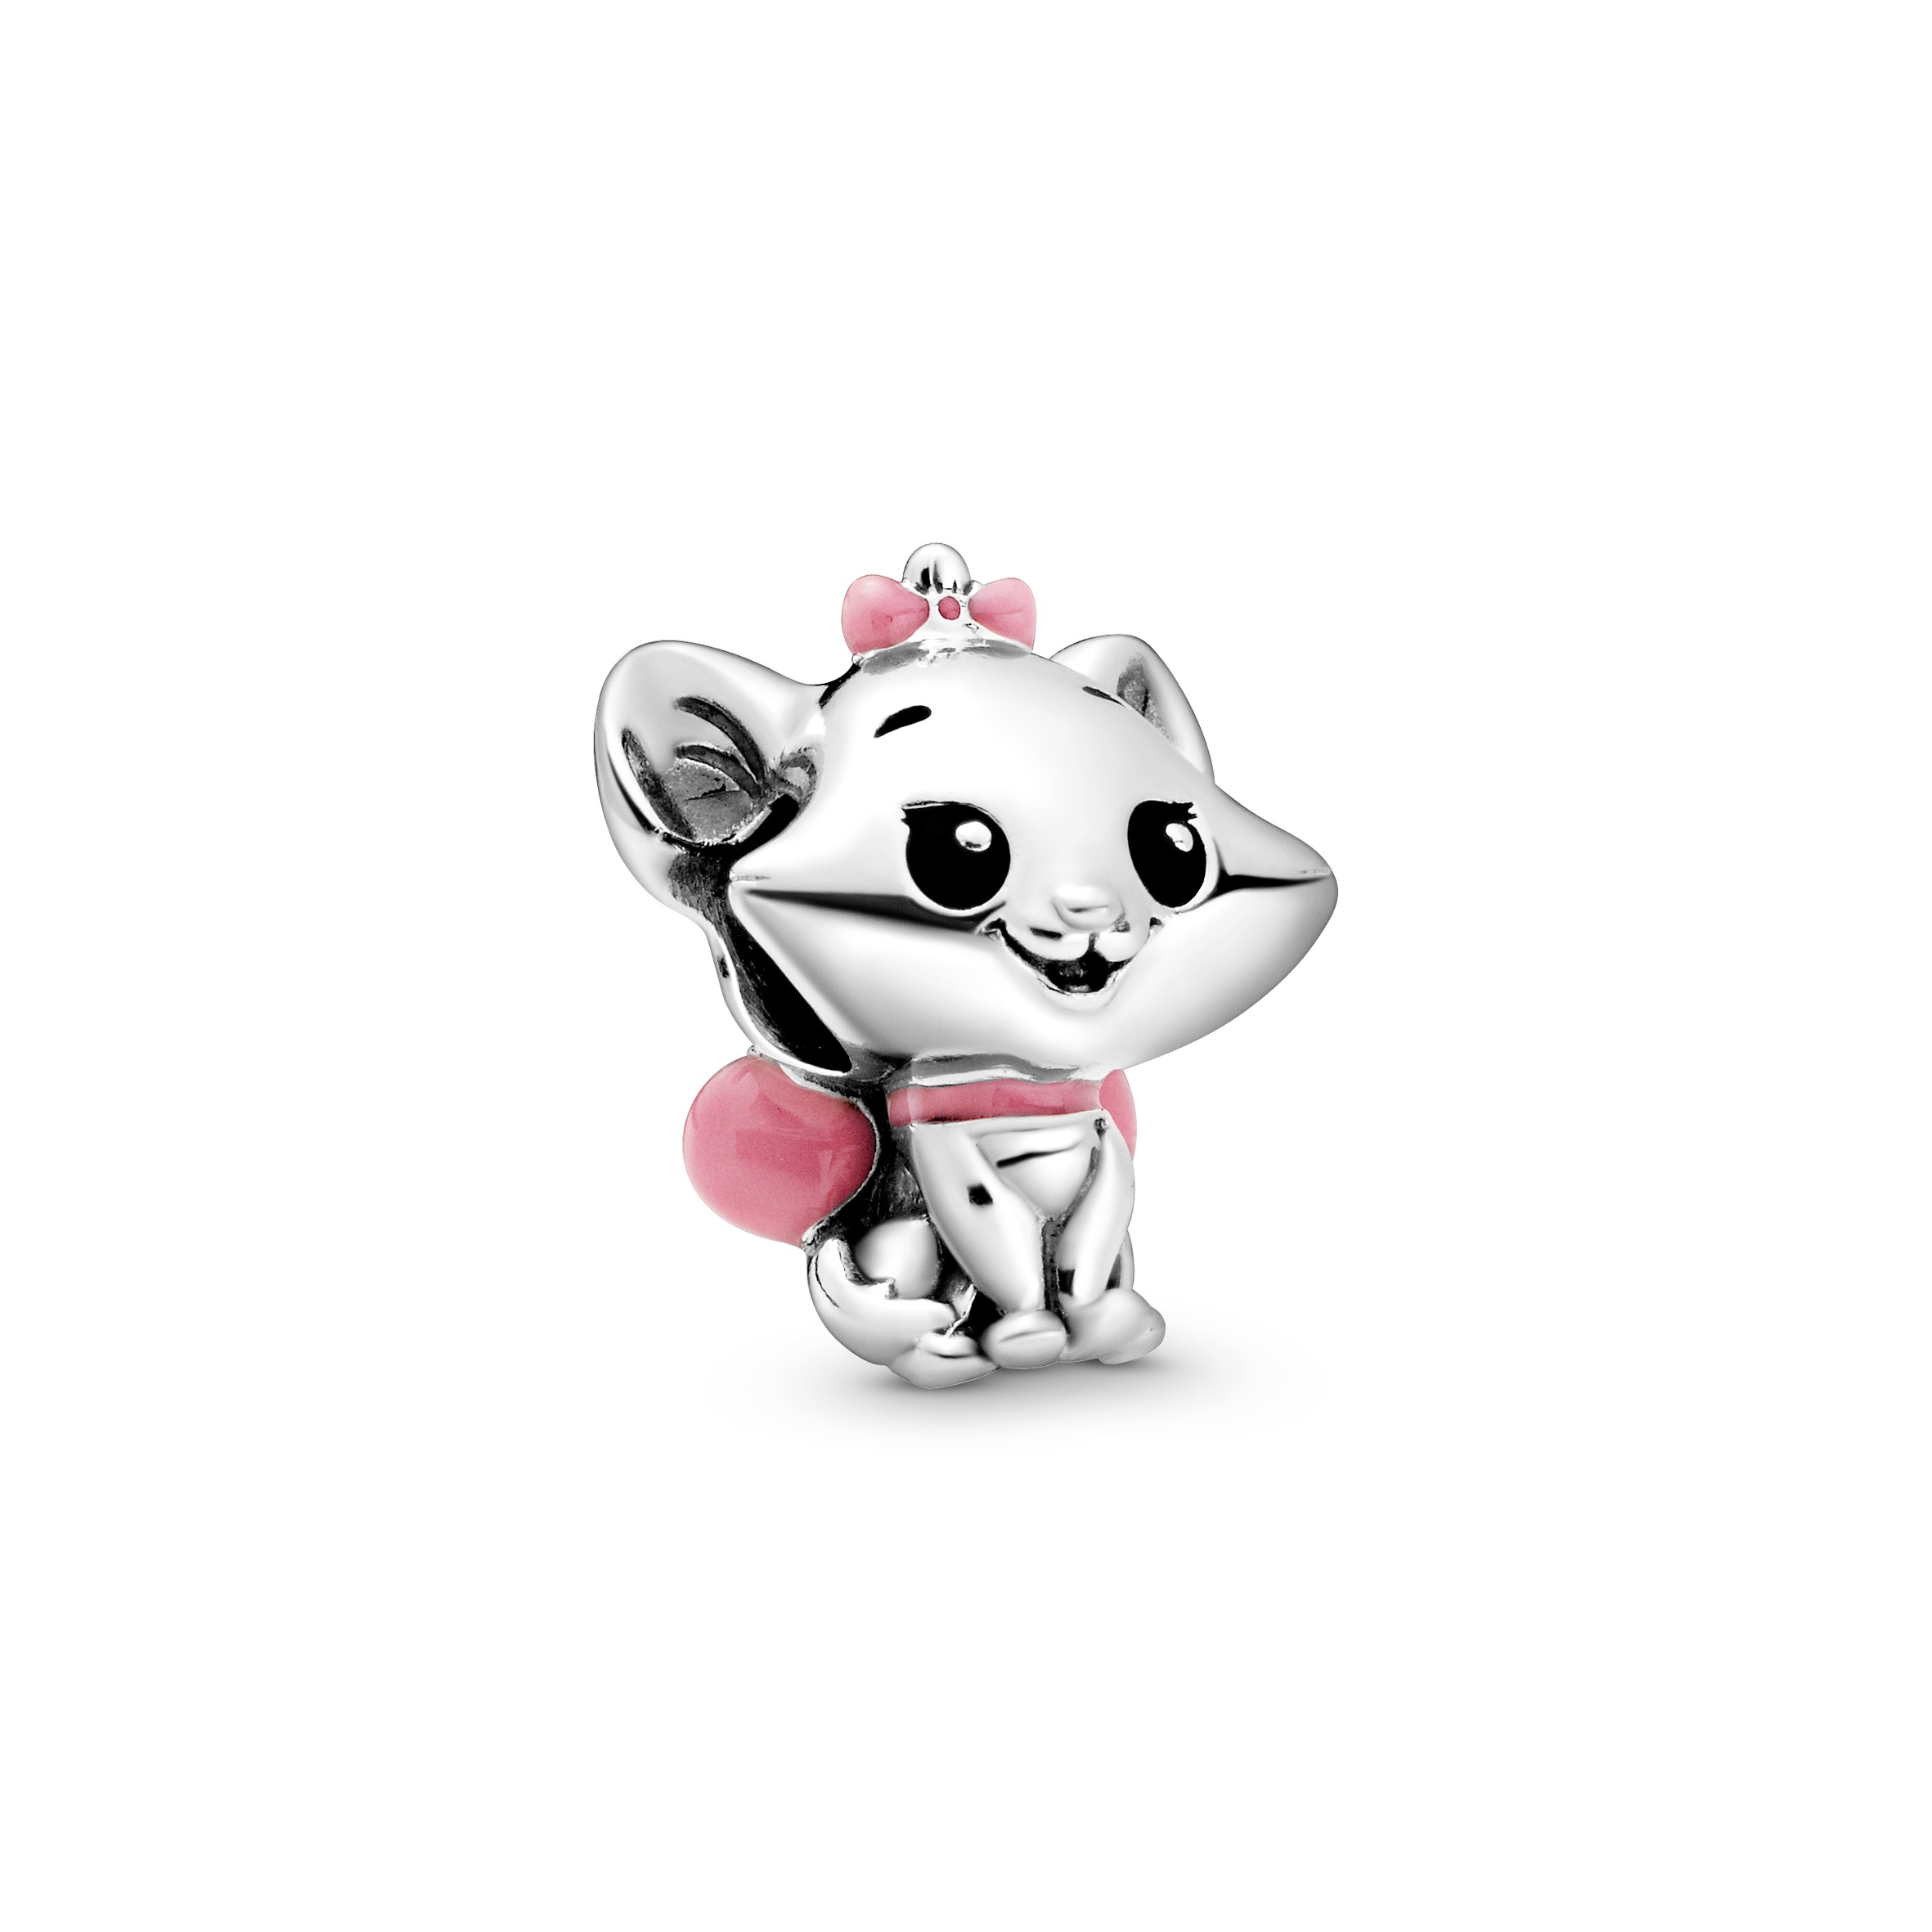 PHOTOS New "Disney Favorite" Pandora Character Charm Collection Now